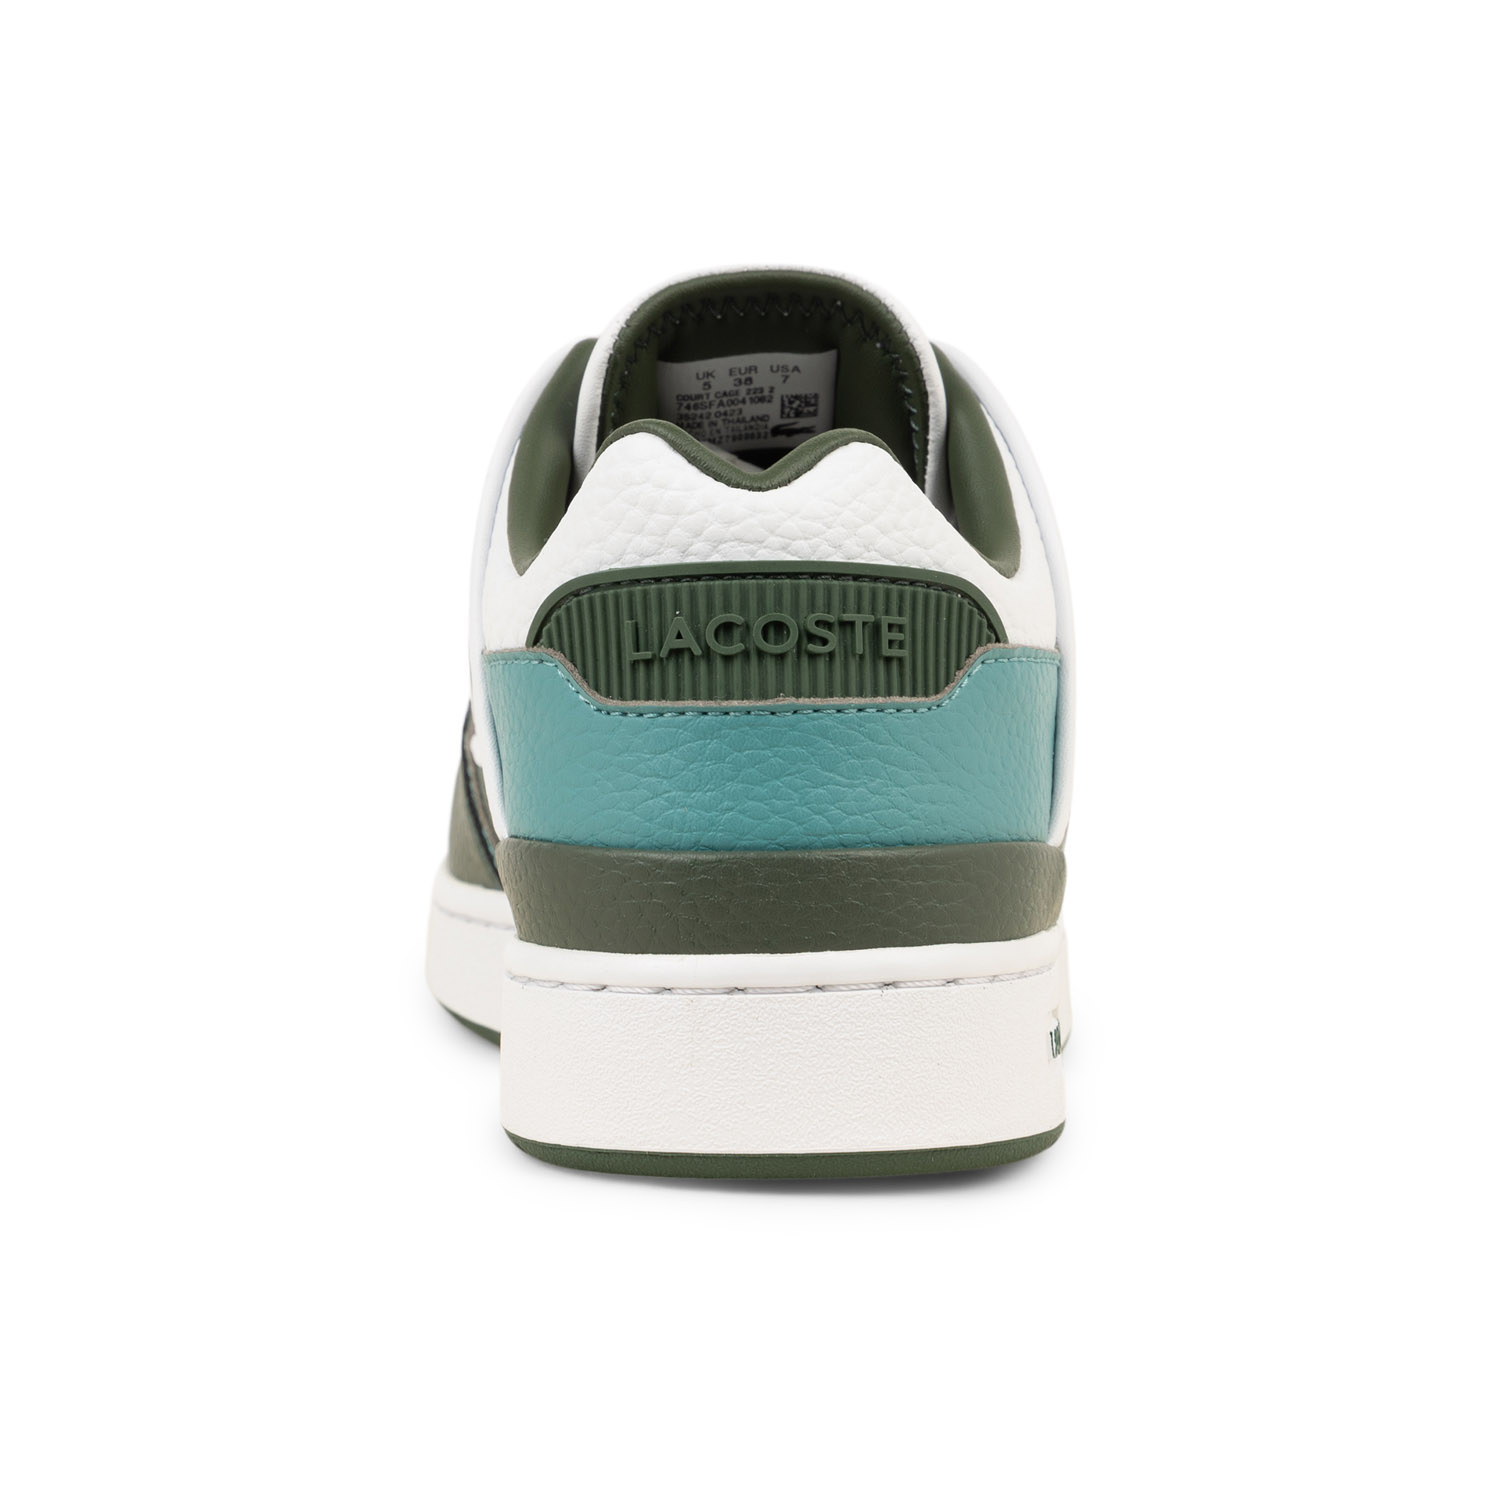 03 - COURT CAGE - LACOSTE - Baskets - Cuir